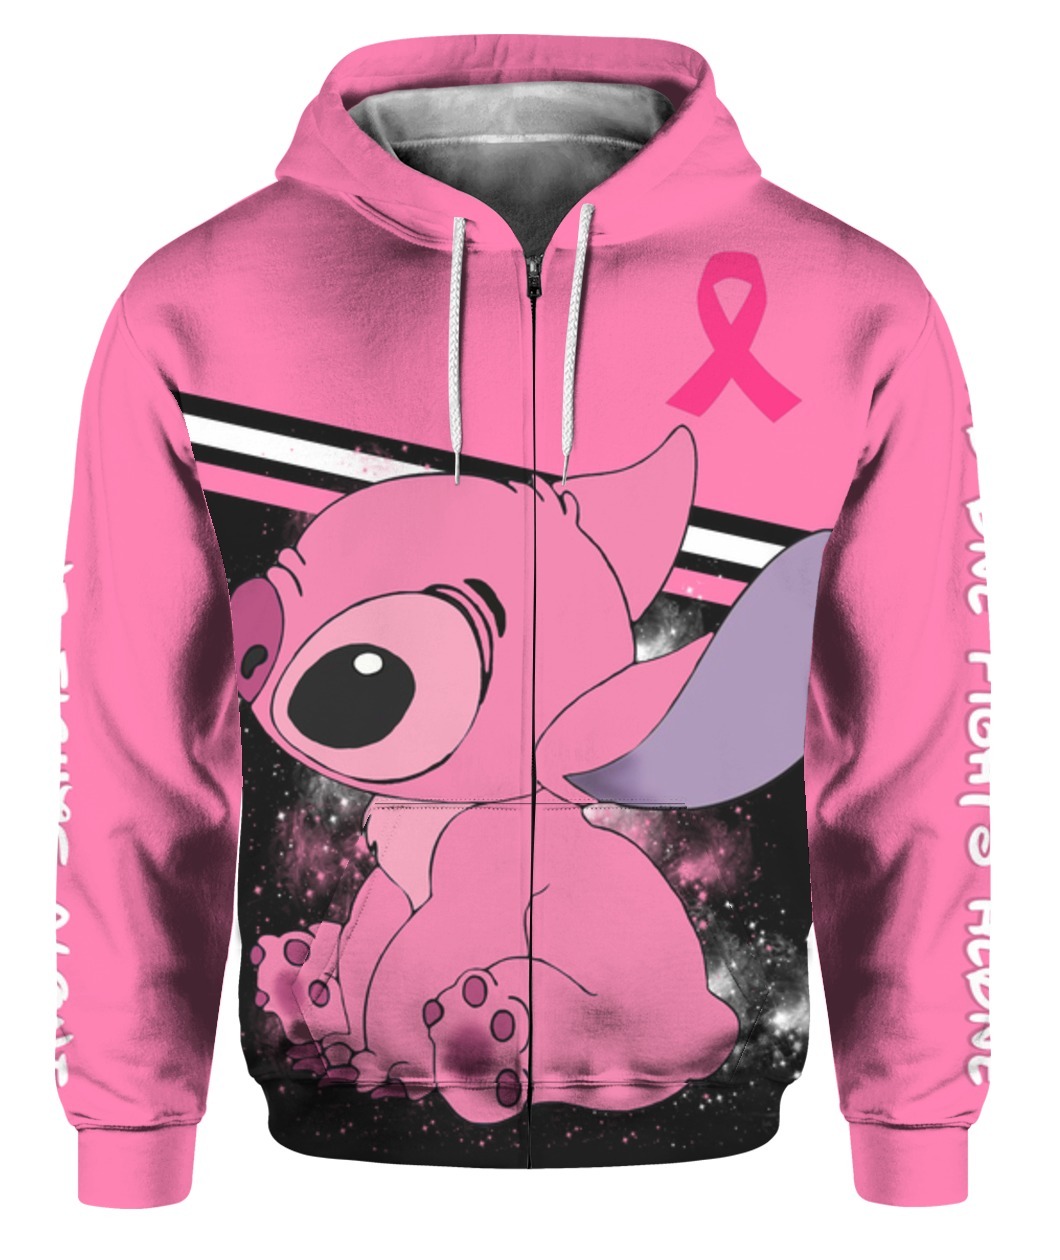 Cancer Awareness Stitch ohana means family 3d hoodie 4